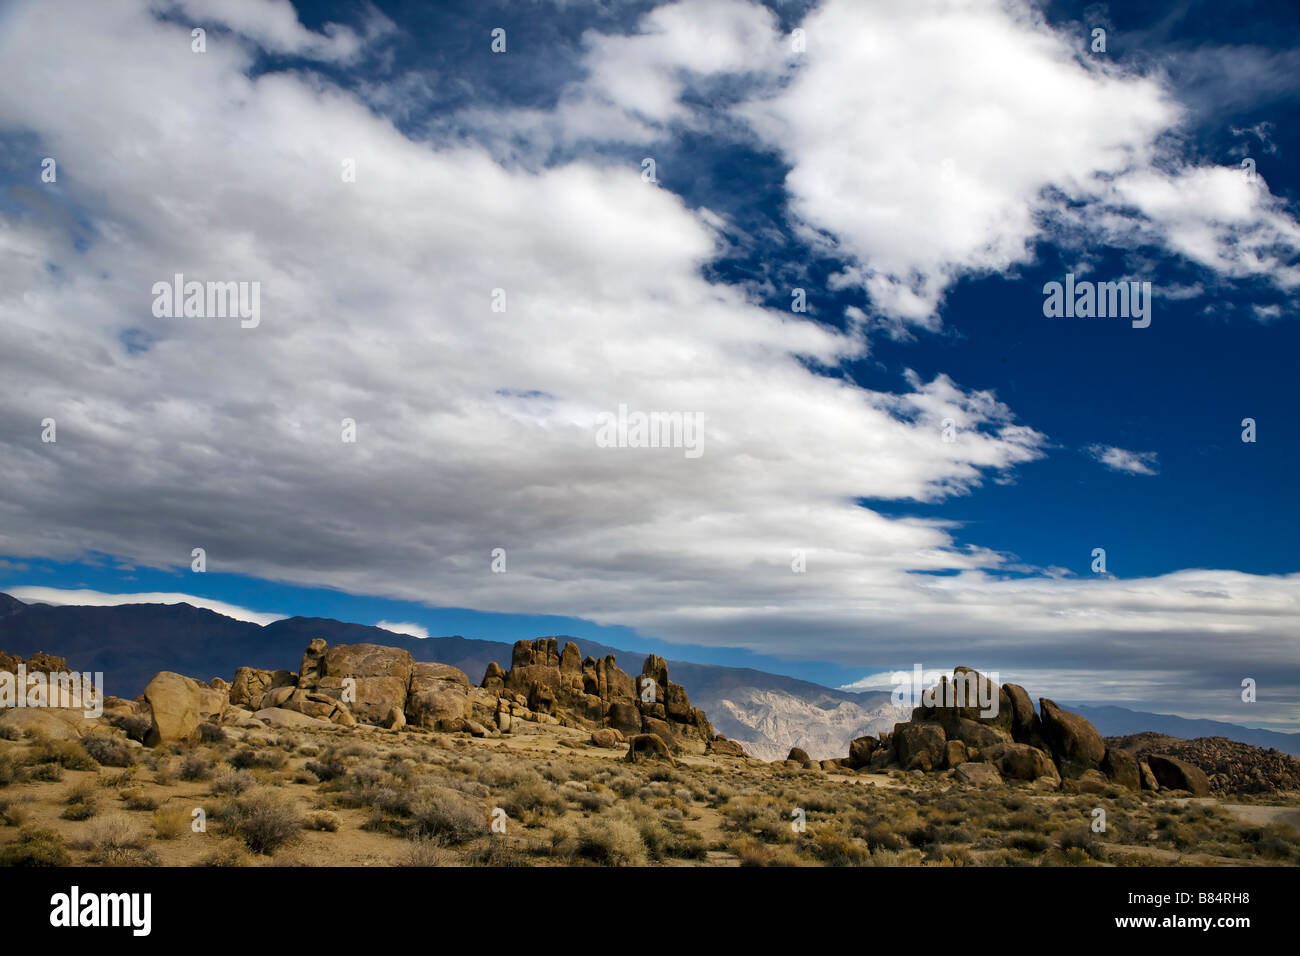 Landscape with white clouds and blue sky Alabama Hills Recreation Lands Lone Pine California Stock Photo